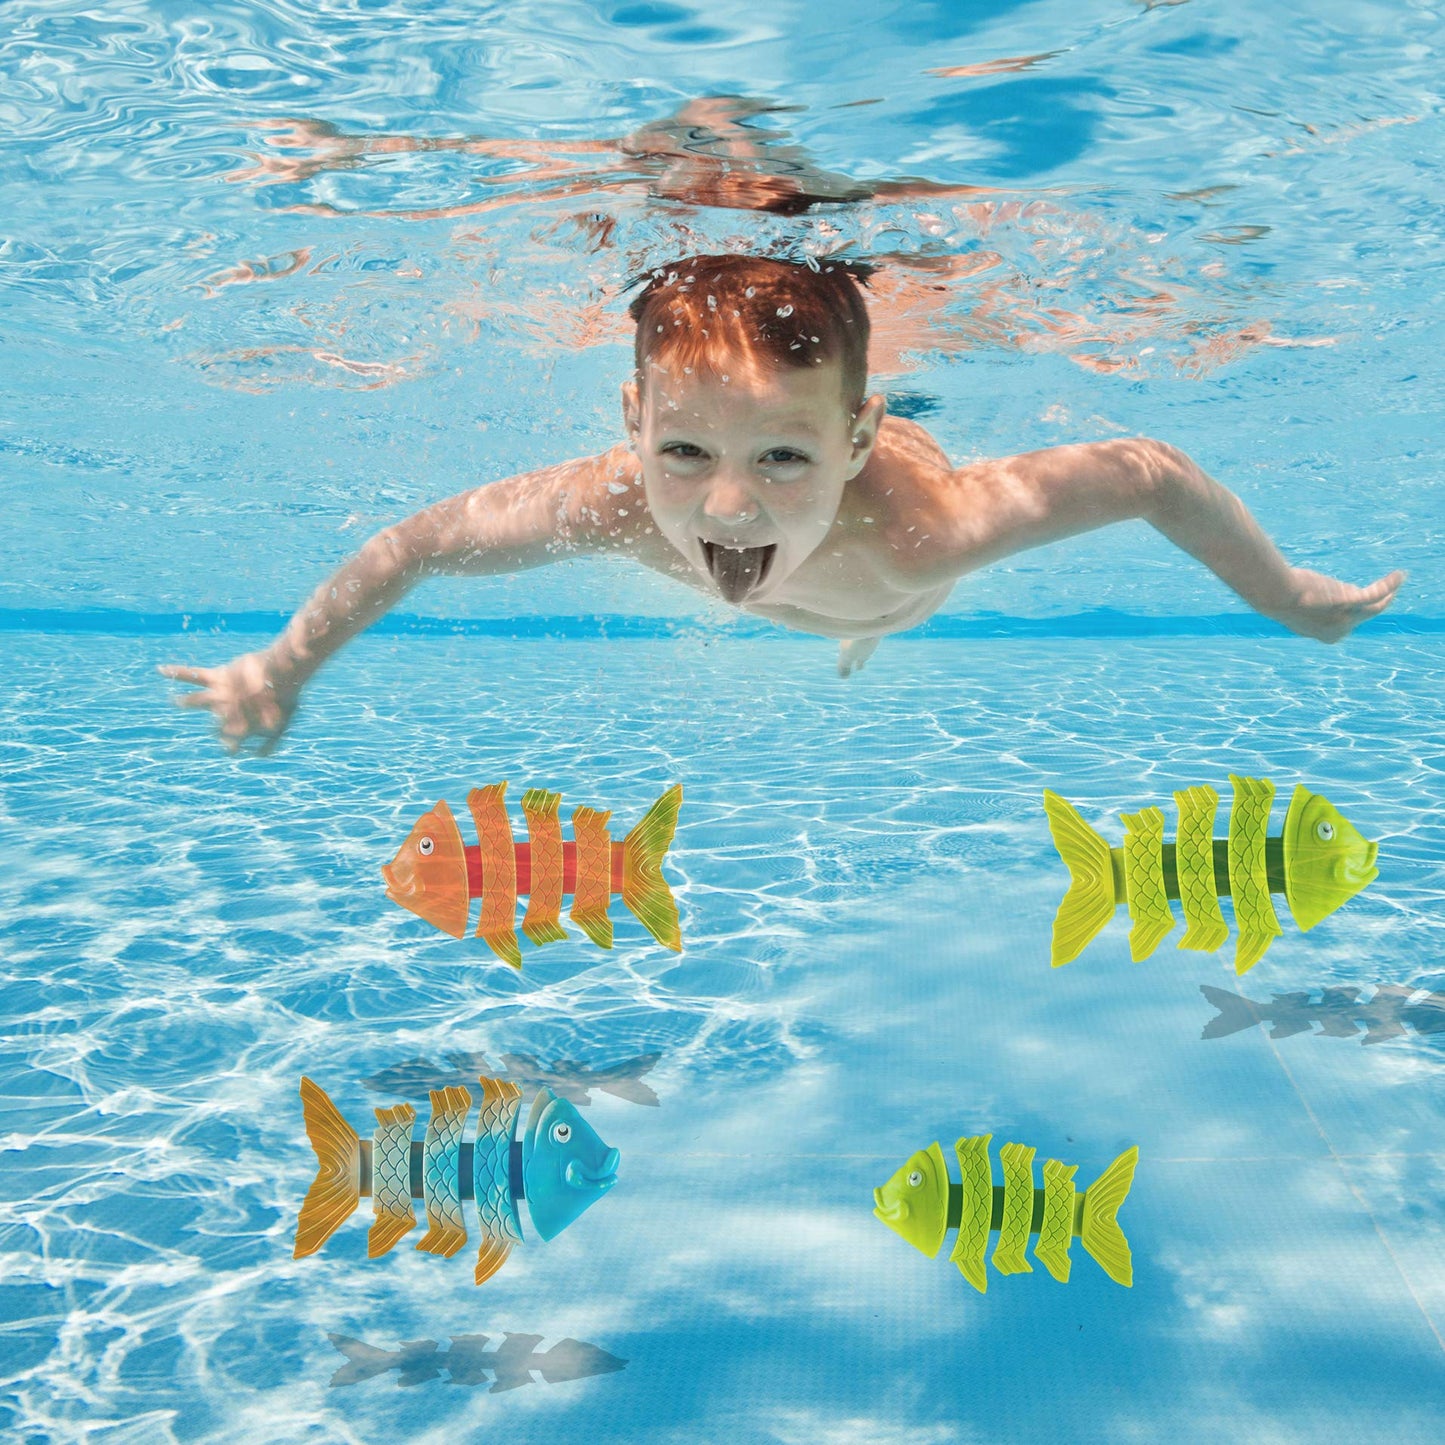 PREXTEX Pool Diving Toys, 24pcs | Kids Swimming Pool Toys, Toddler/Kids Pool Toys, Swim Toys, Pool Dive Toys | Pool Games for Kids | Diving Toys for Pool for Kids, Toddlers, Adults, Family, All Ages